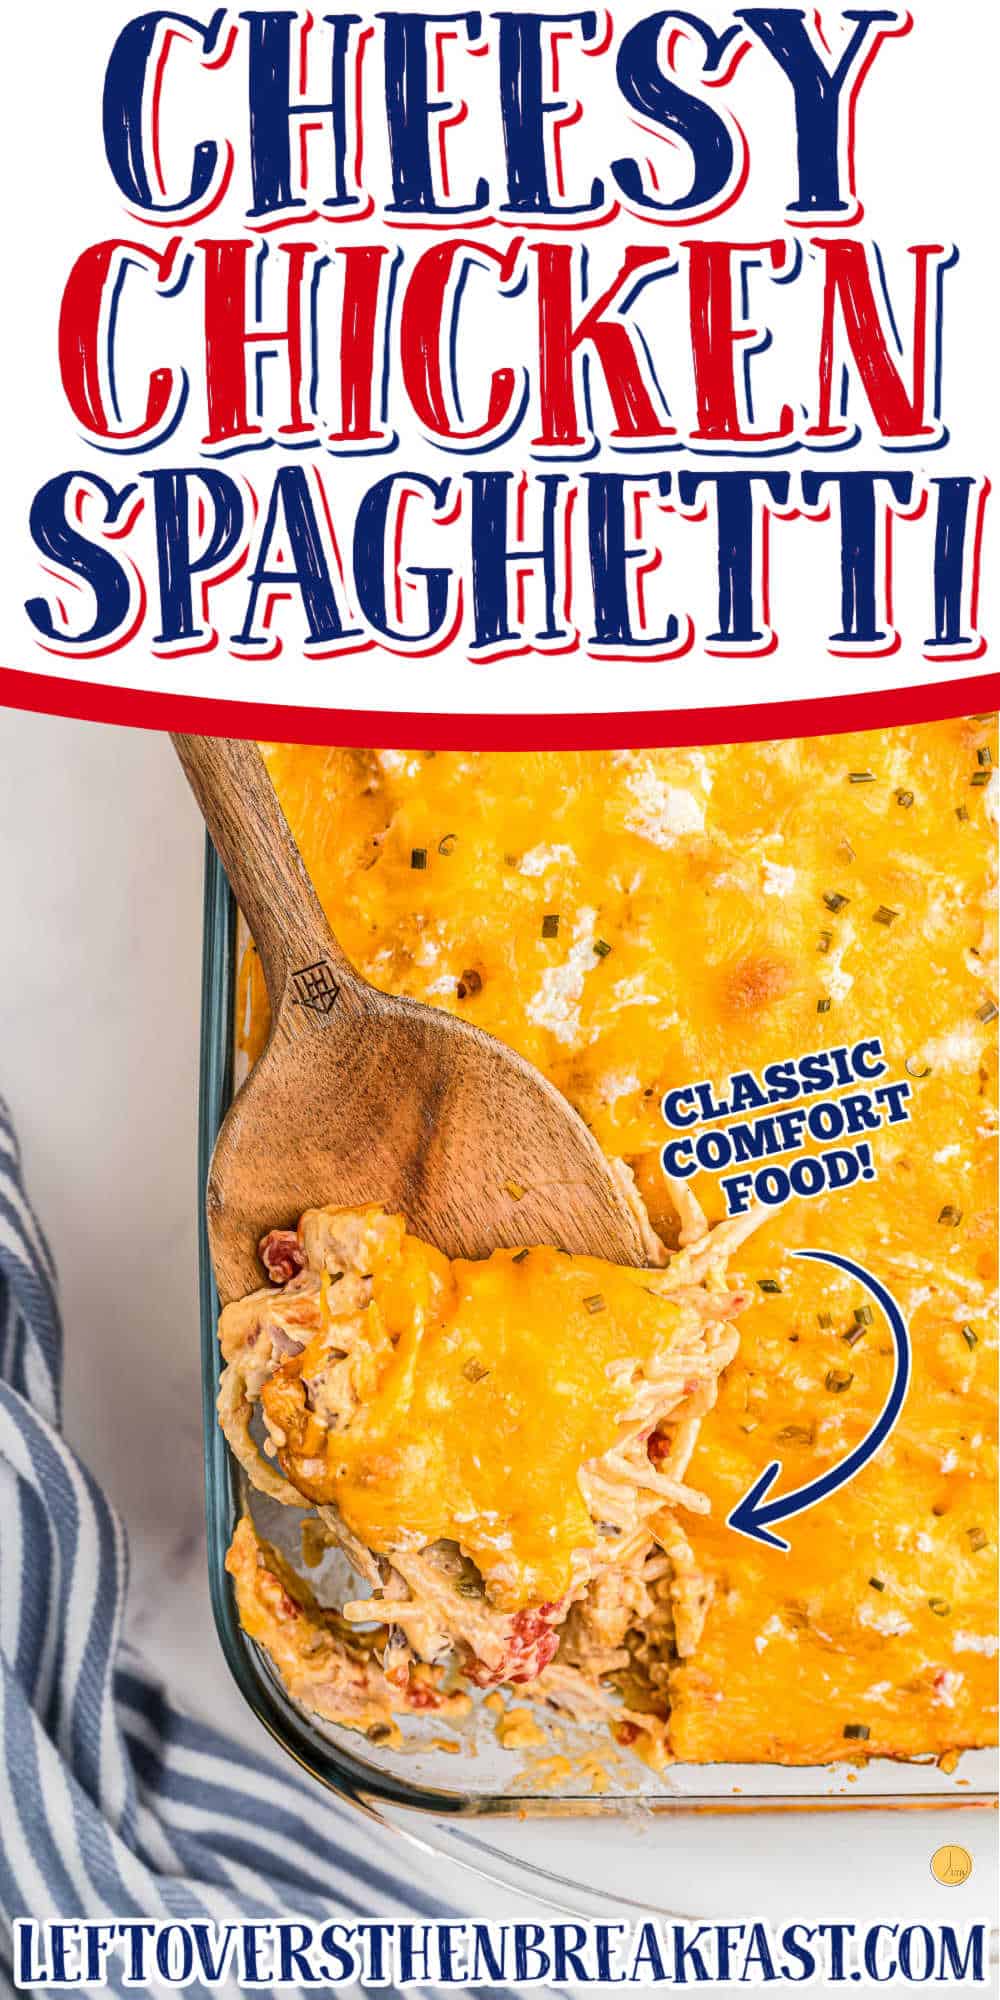 spoon of chicken spaghetti with text "cheesy"